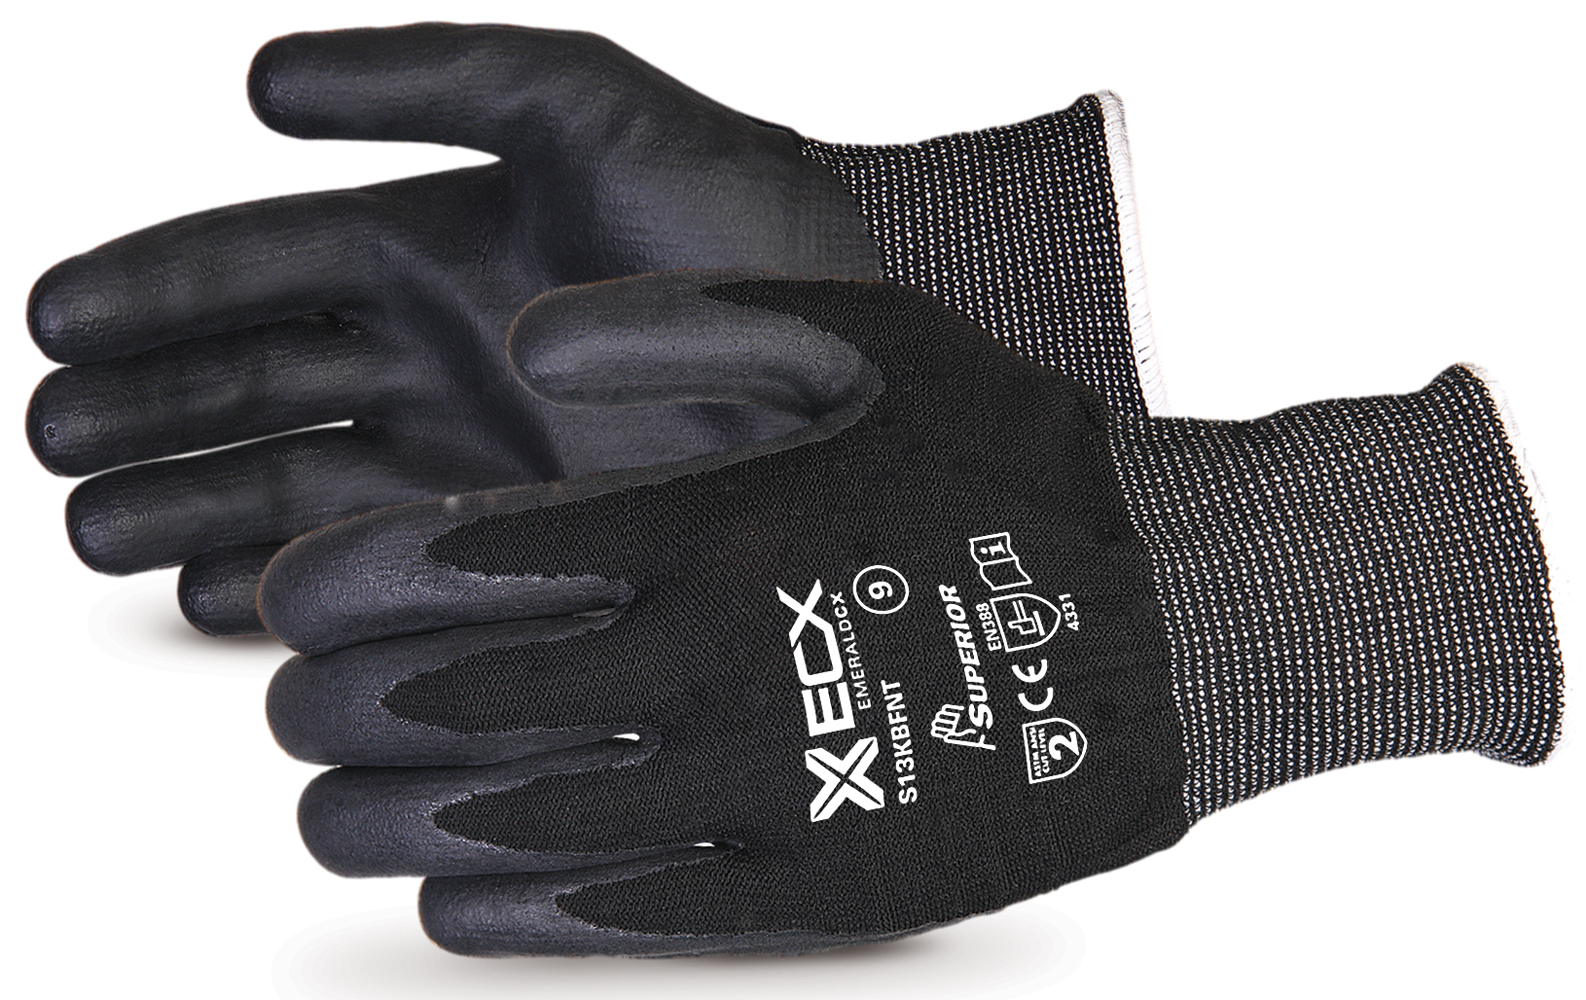 Superiorglove SUS13KBFNT Emerald CX Nylon/Stainless-Steel Cut-Resistant String-Knit Glove-0